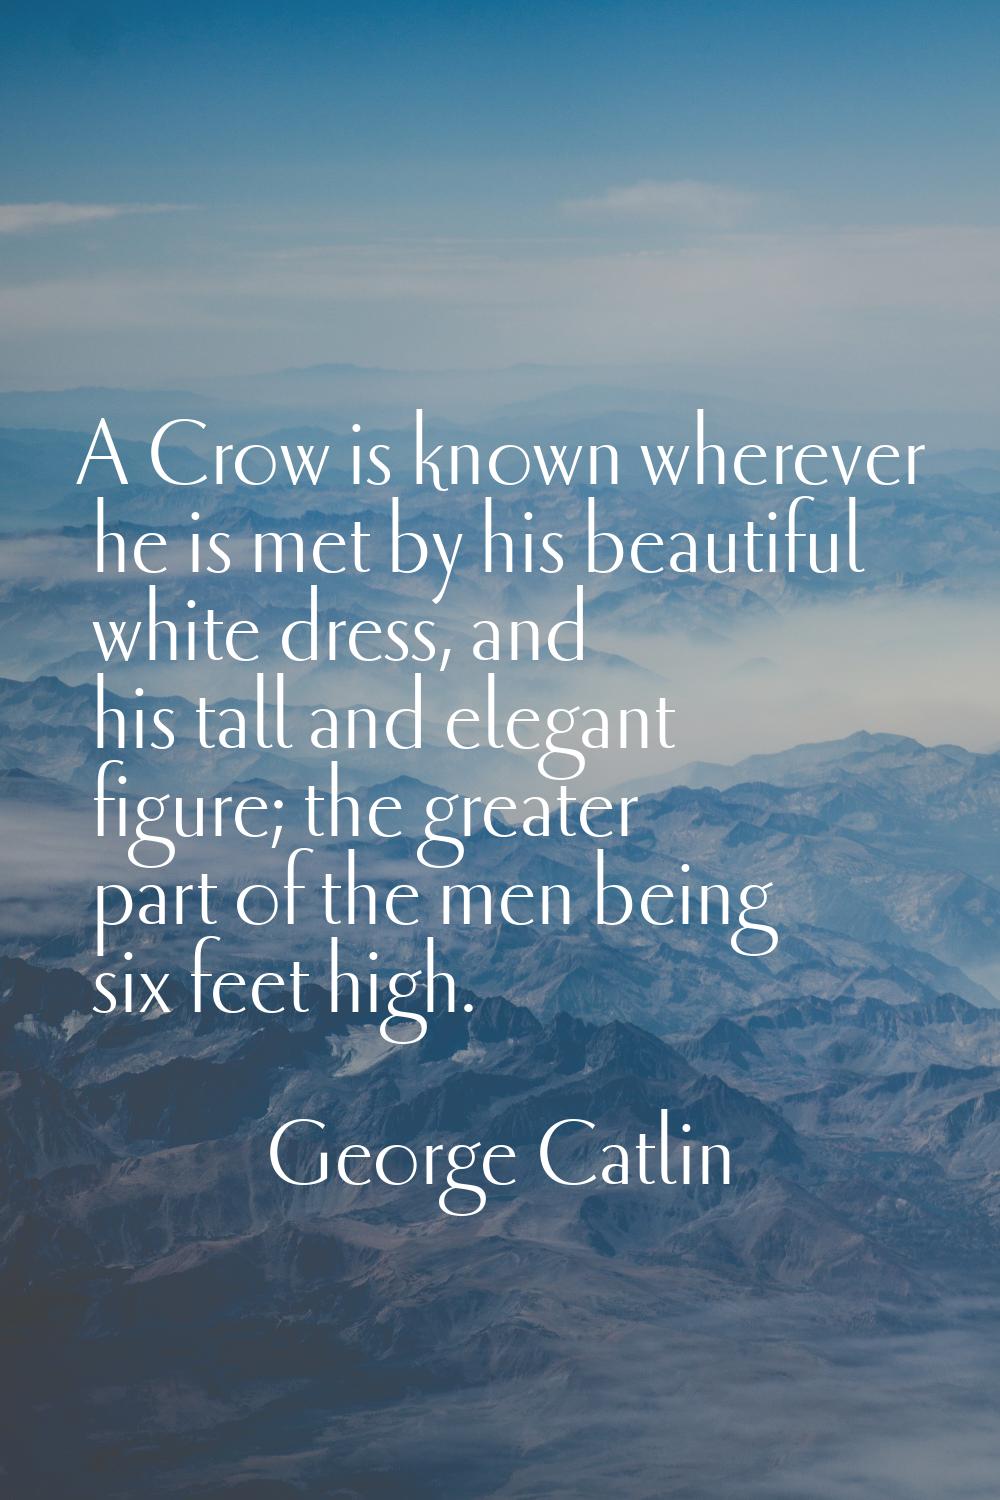 A Crow is known wherever he is met by his beautiful white dress, and his tall and elegant figure; t